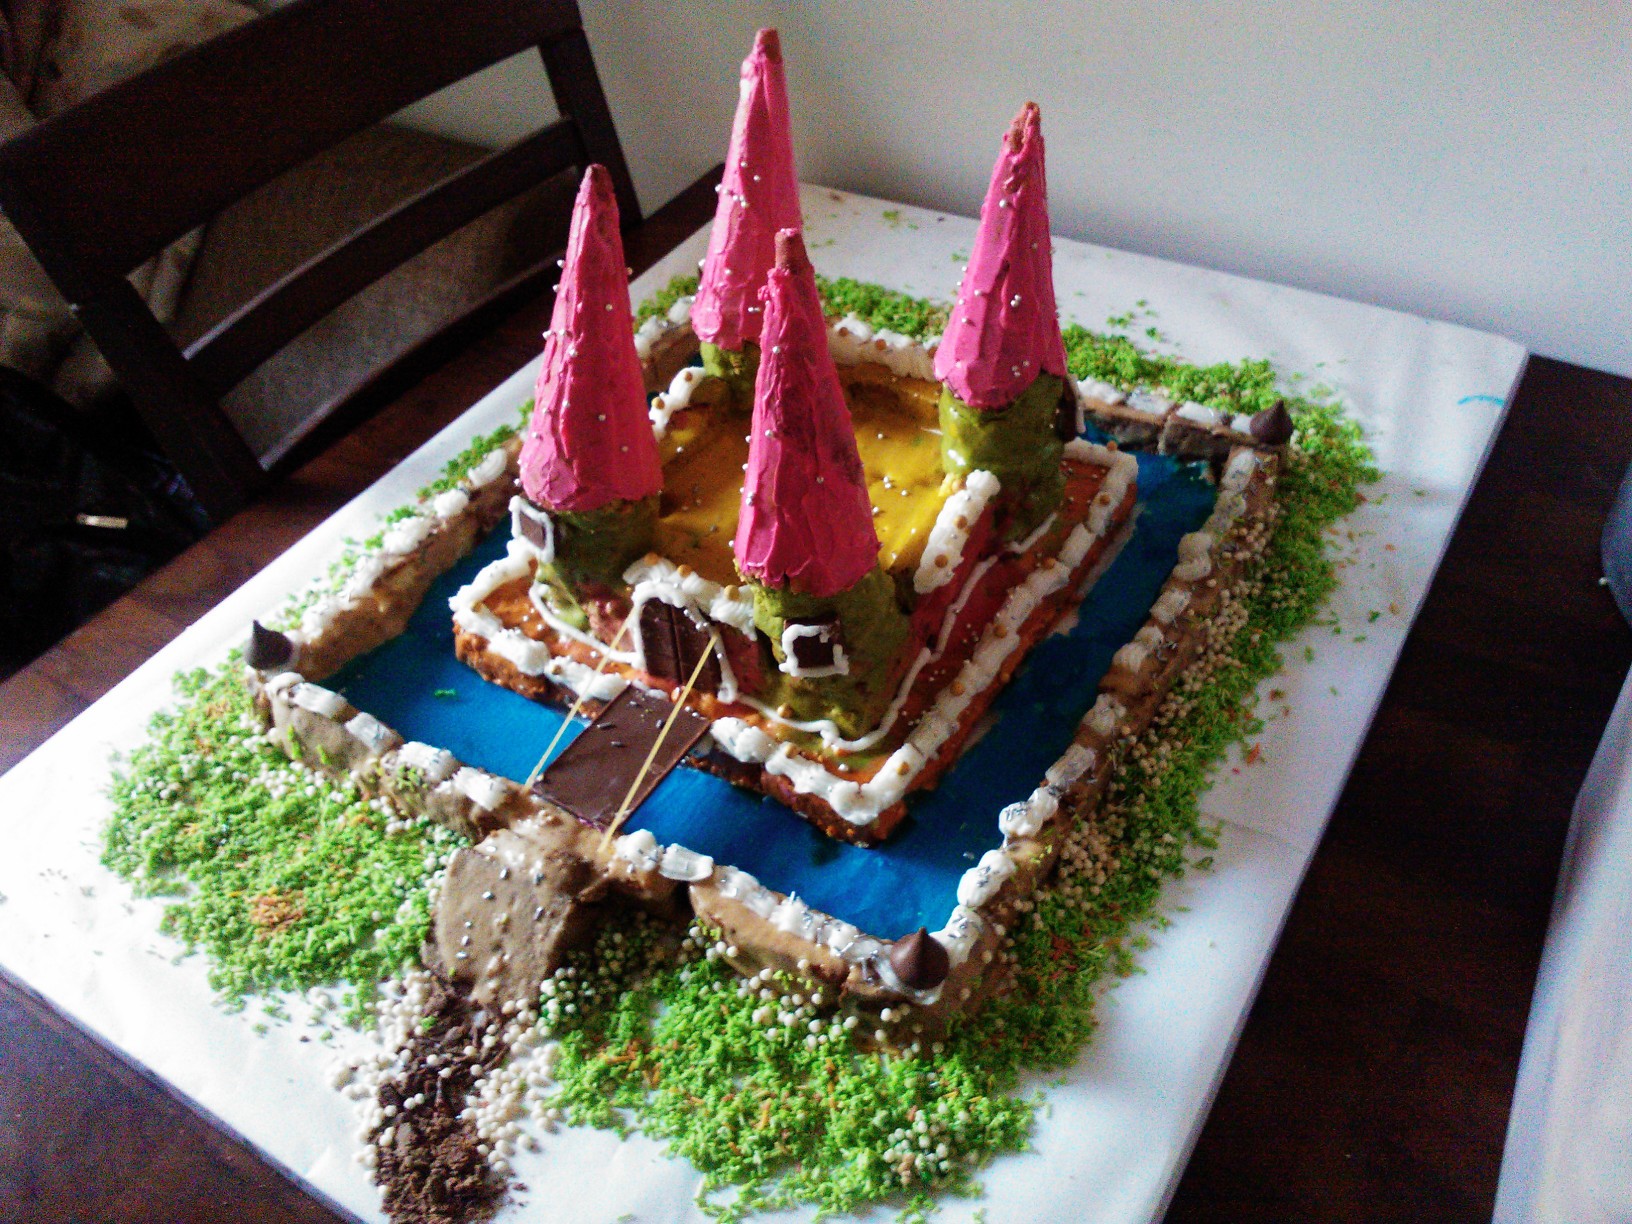 Cool Castle Cake for my Daughter's 6th Birthday